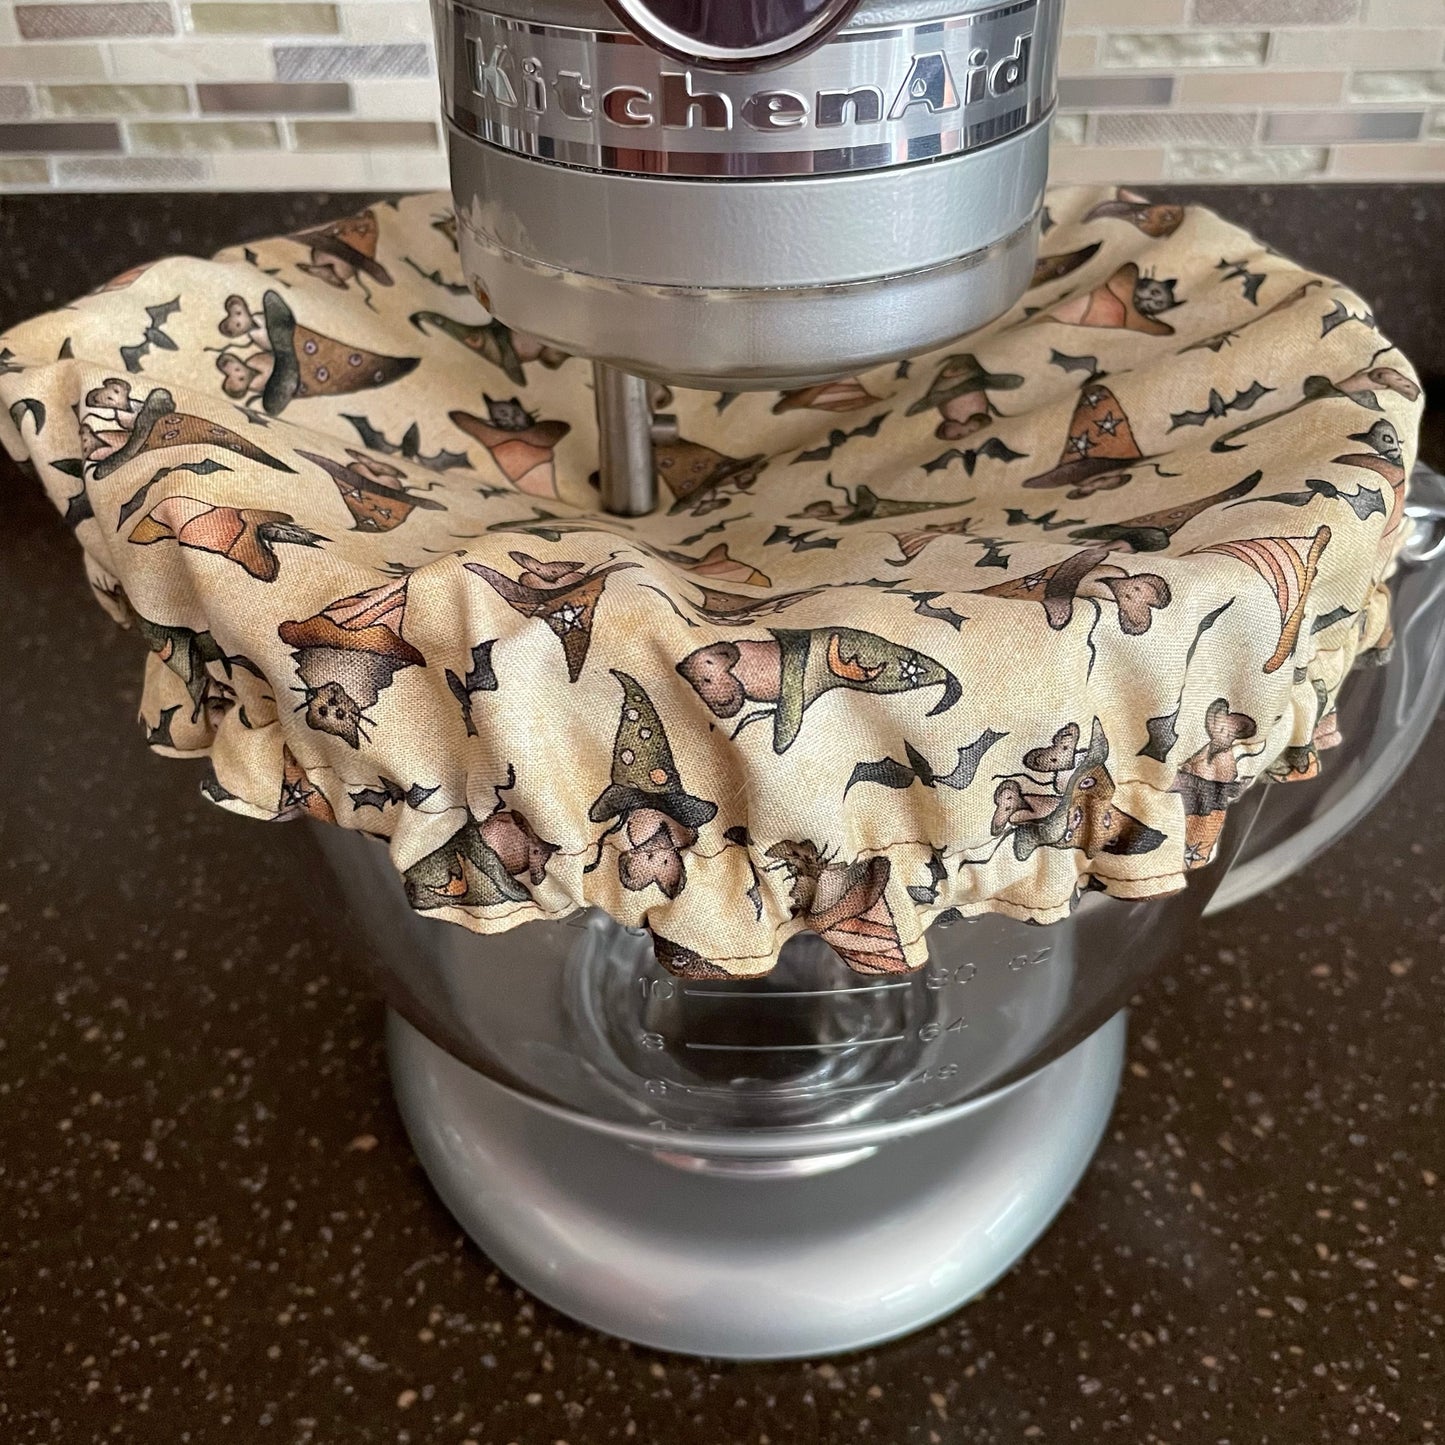 Stand Mixer Bowl Covers - Bats, Cats, and Mice